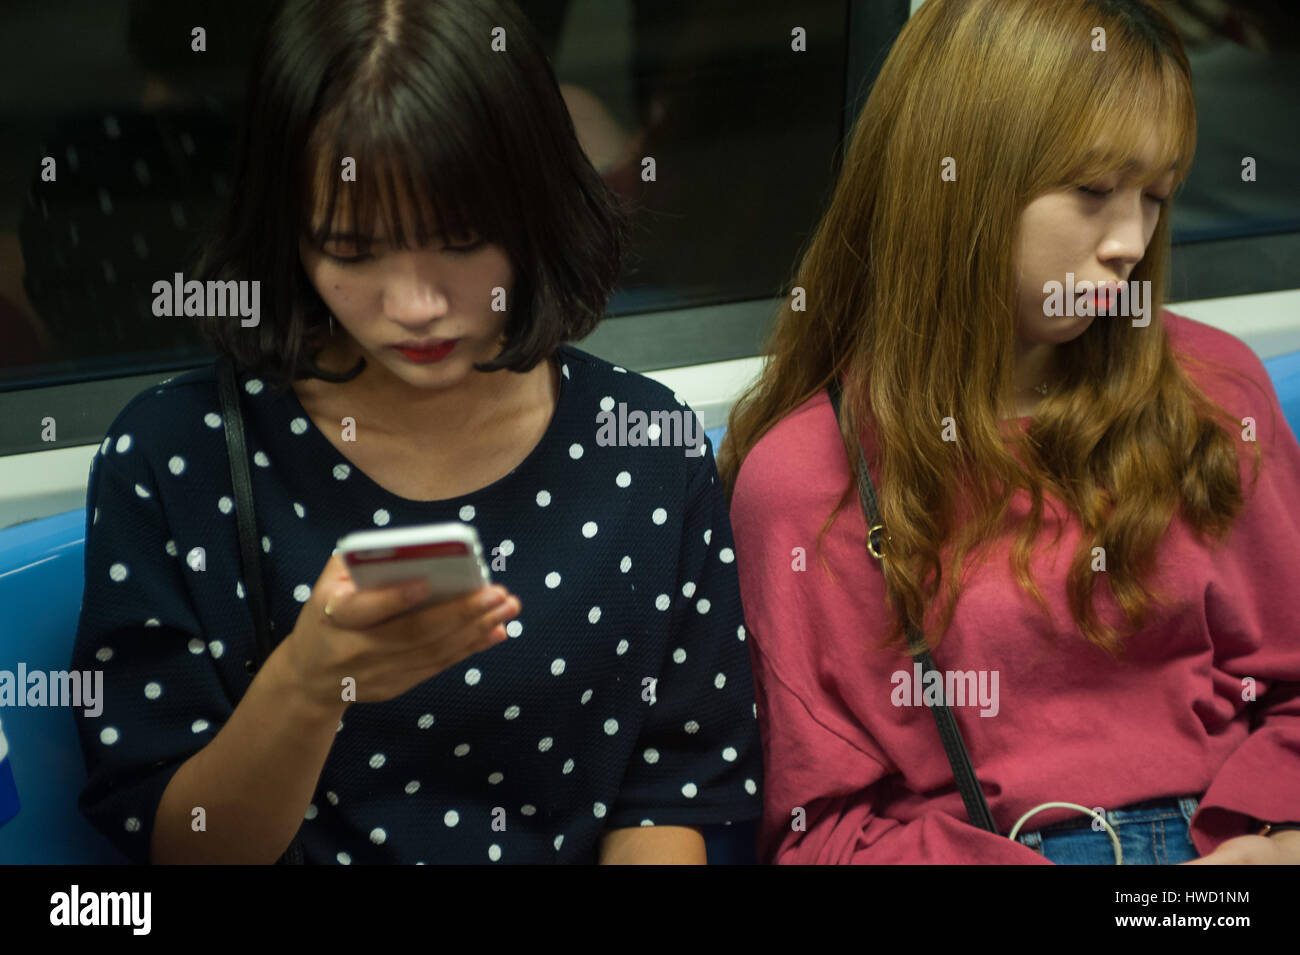 22.09.2016, Singapore, Republic of Singapore - Two young women on a metro in Singapore. Stock Photo